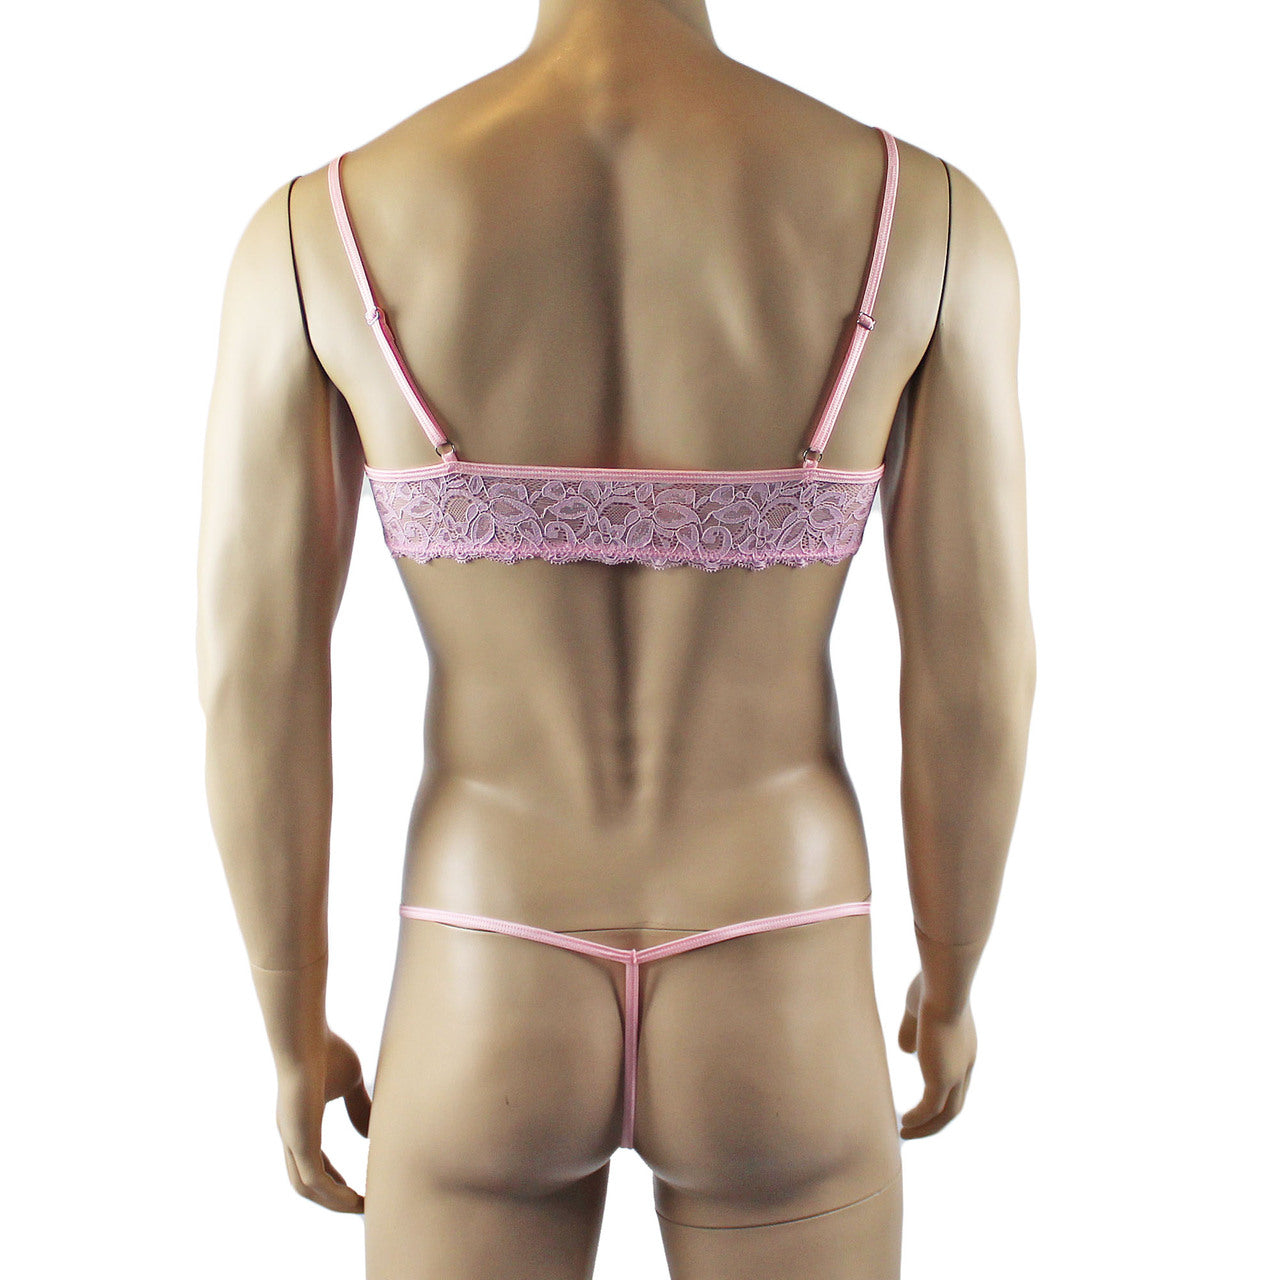 Mens Kristy Lingerie Bra Top and Pouch G string Light Pink